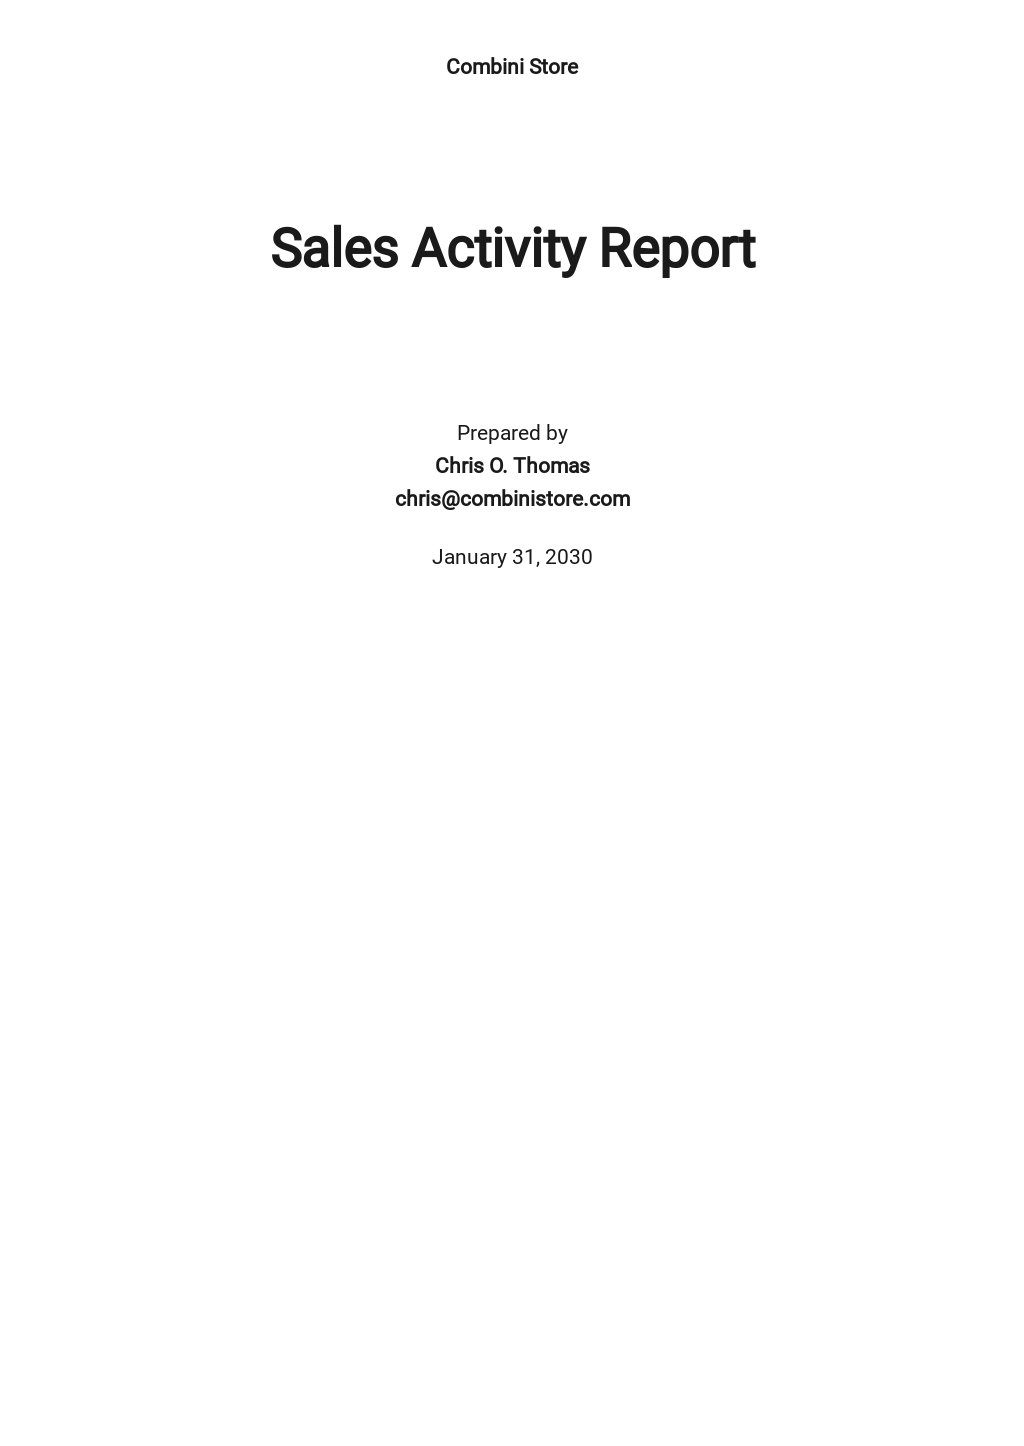 Daily Sales Activity Report Template - Google Docs, Google Sheets With Daily Activity Report Template